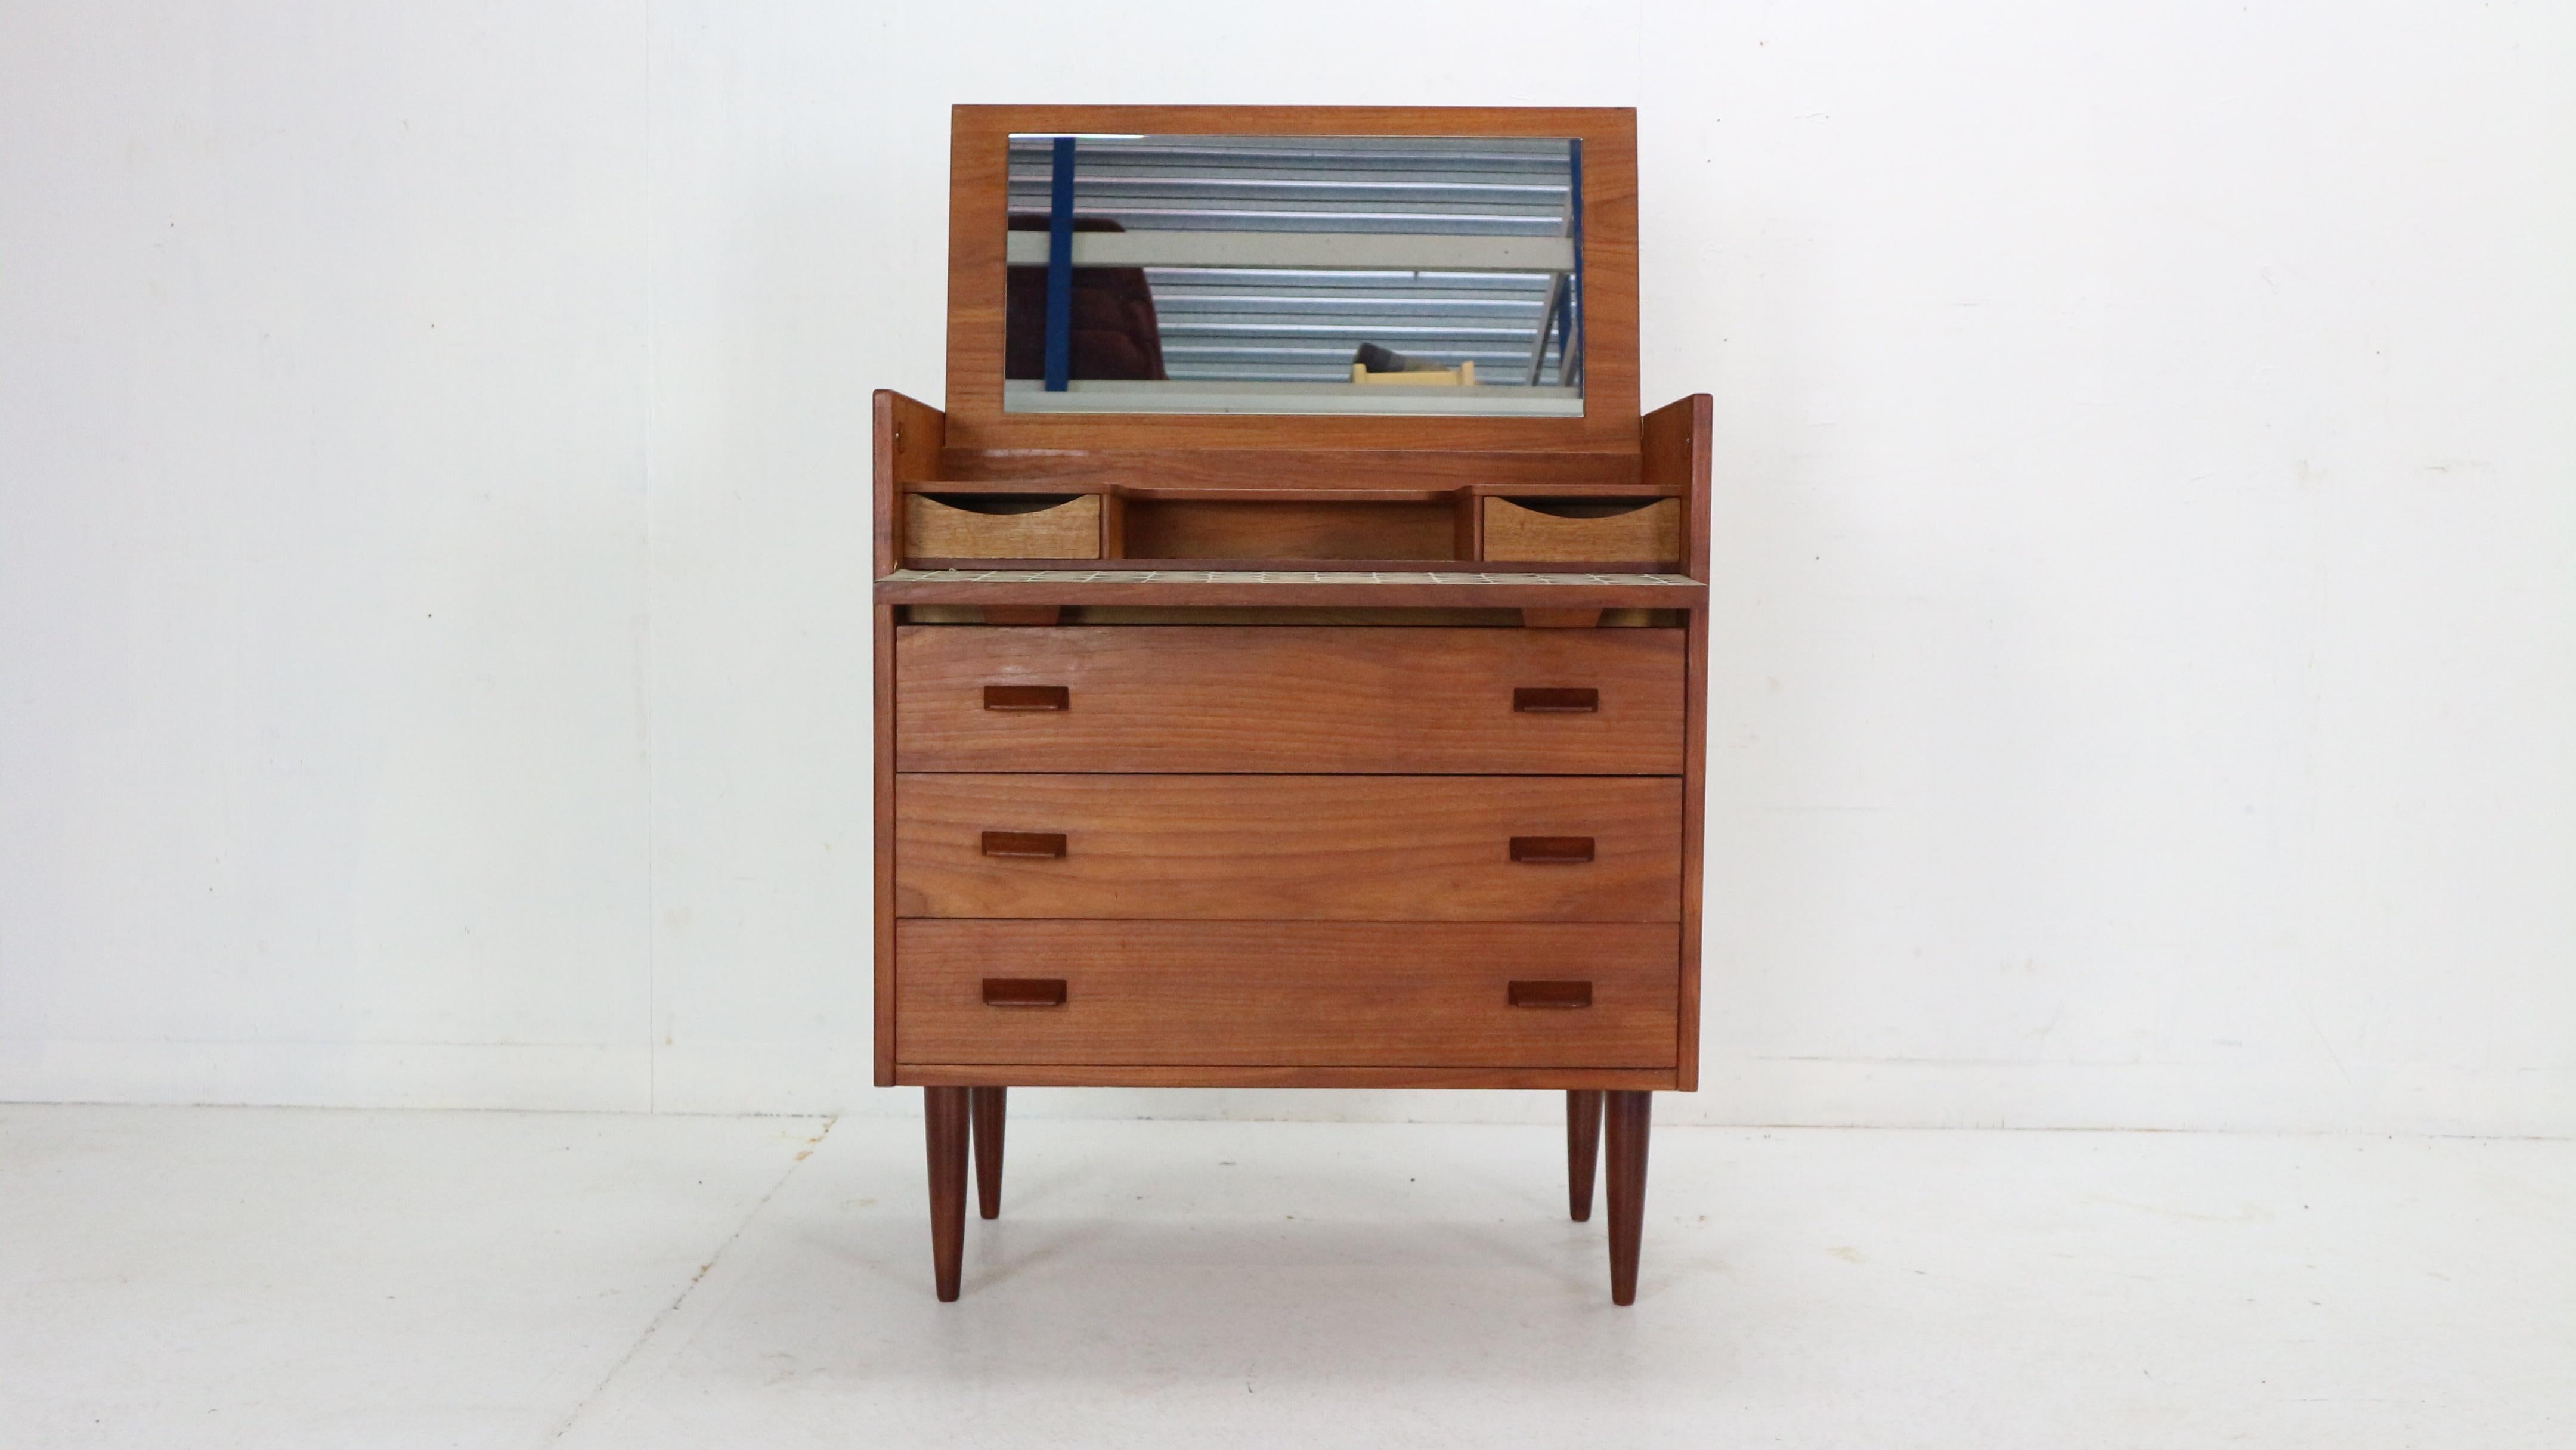 Scandinavian Modern period teak make up table with flip top beaming small cabinet- dresser made in 1960's period Denmark.

Made of teak wood. Mirror glass has been replaced with the new one, no s ucratches.
Three spacious drawers in the centre of